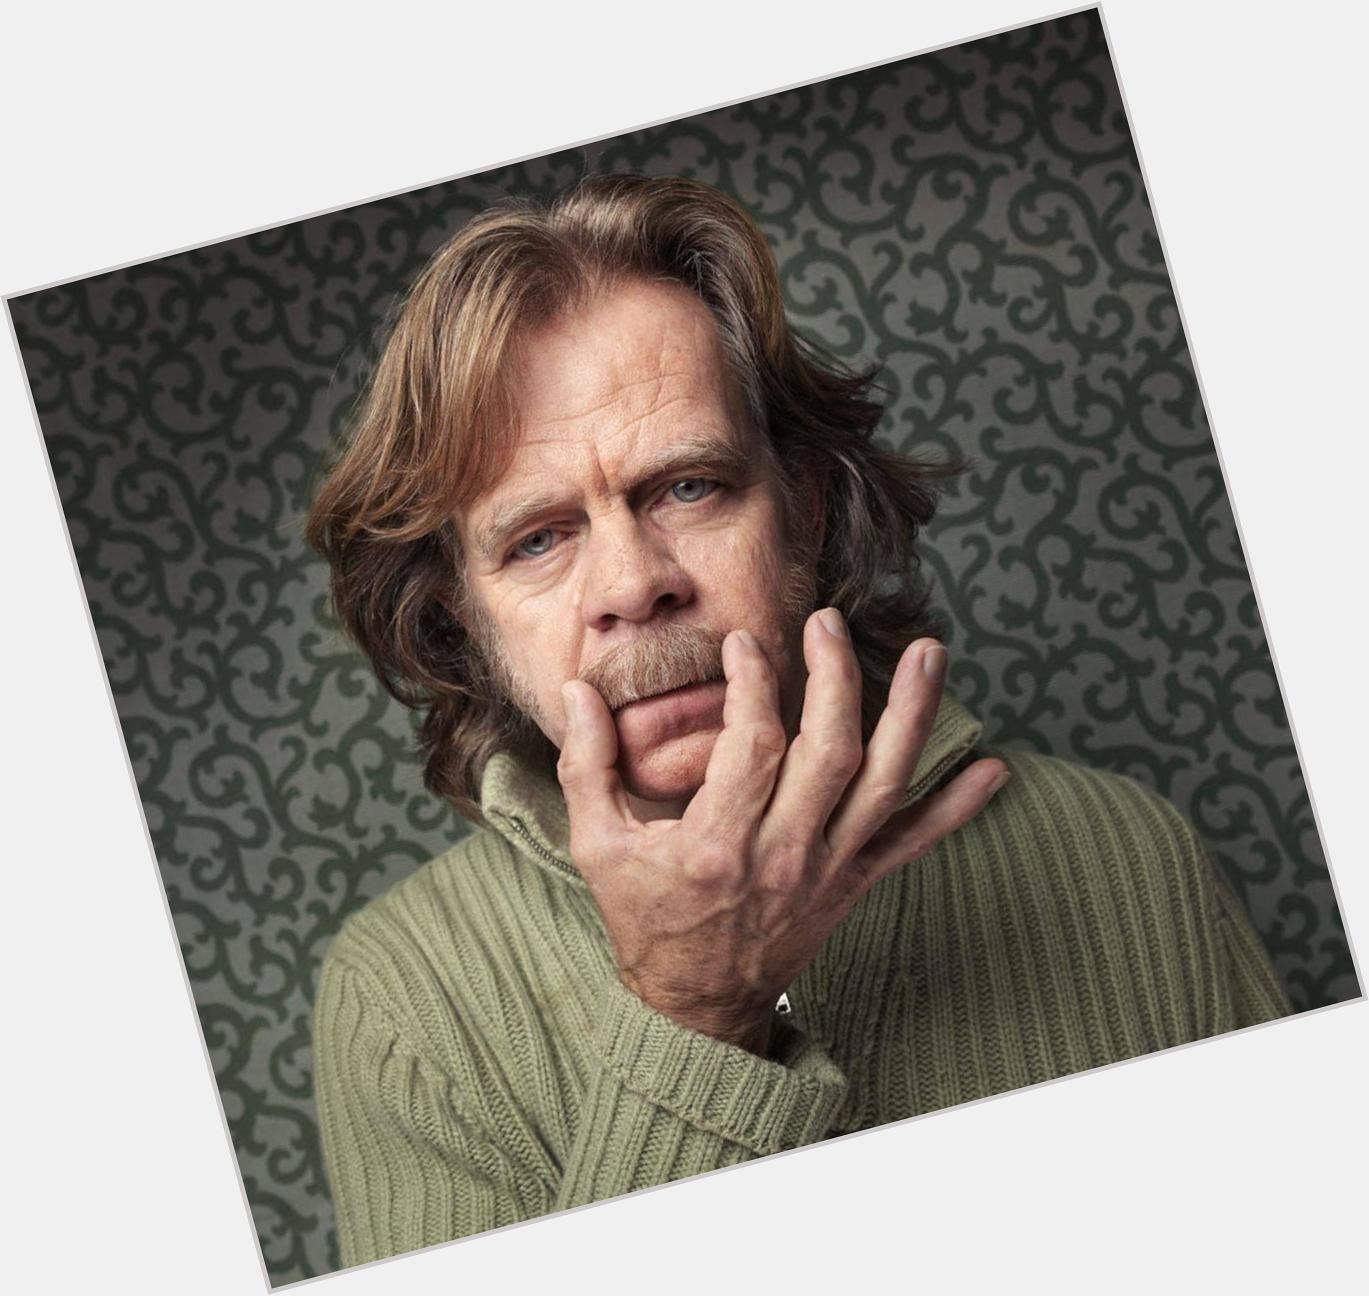 Happy Birthday to William H. Macy who turns 69 today! 